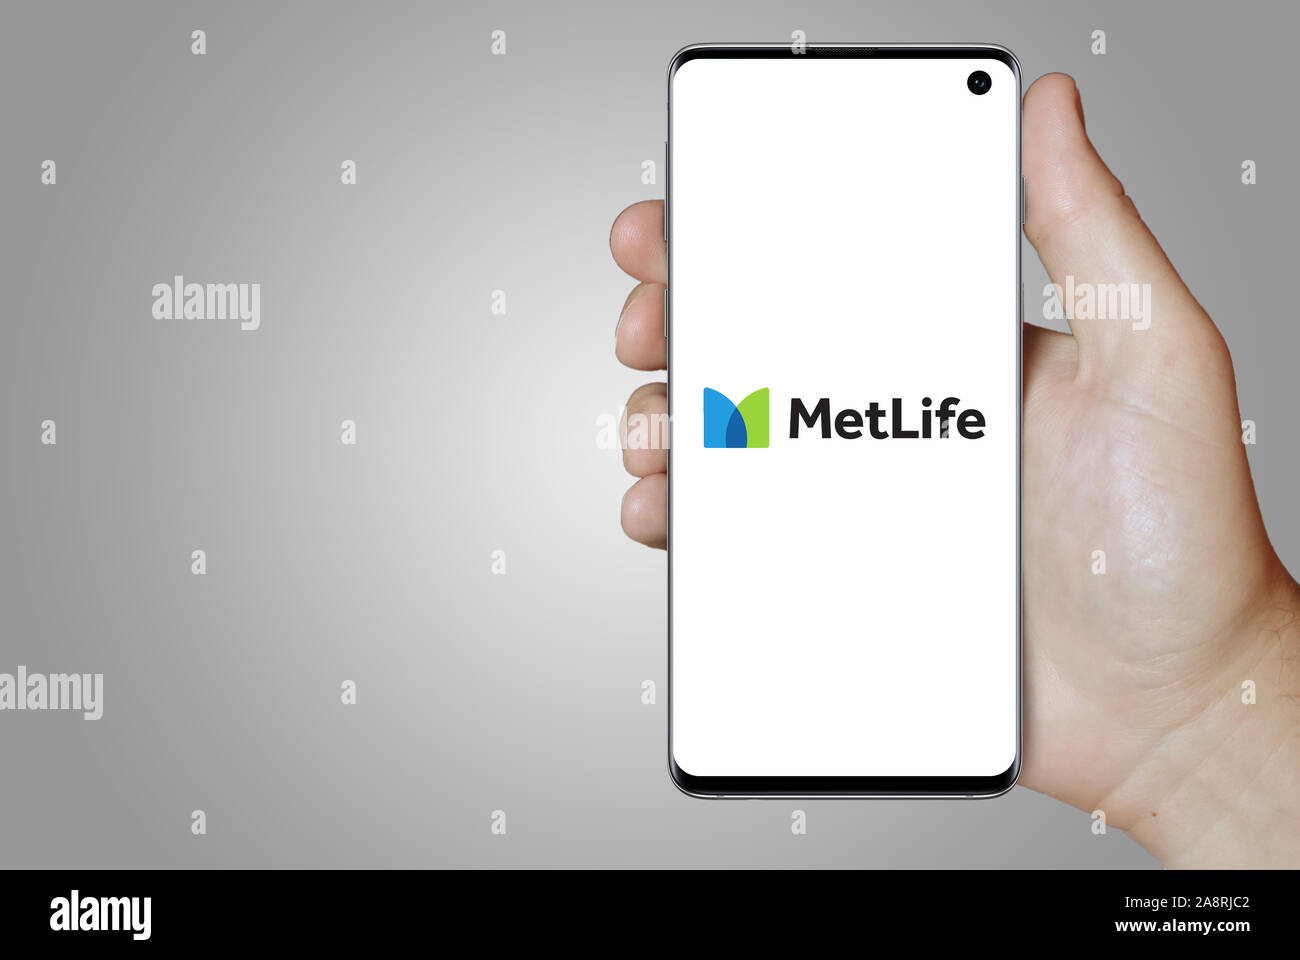 Logo of public company MetLife Inc. displayed on a smartphone. Grey background. Credit: PIXDUCE Stock Photo